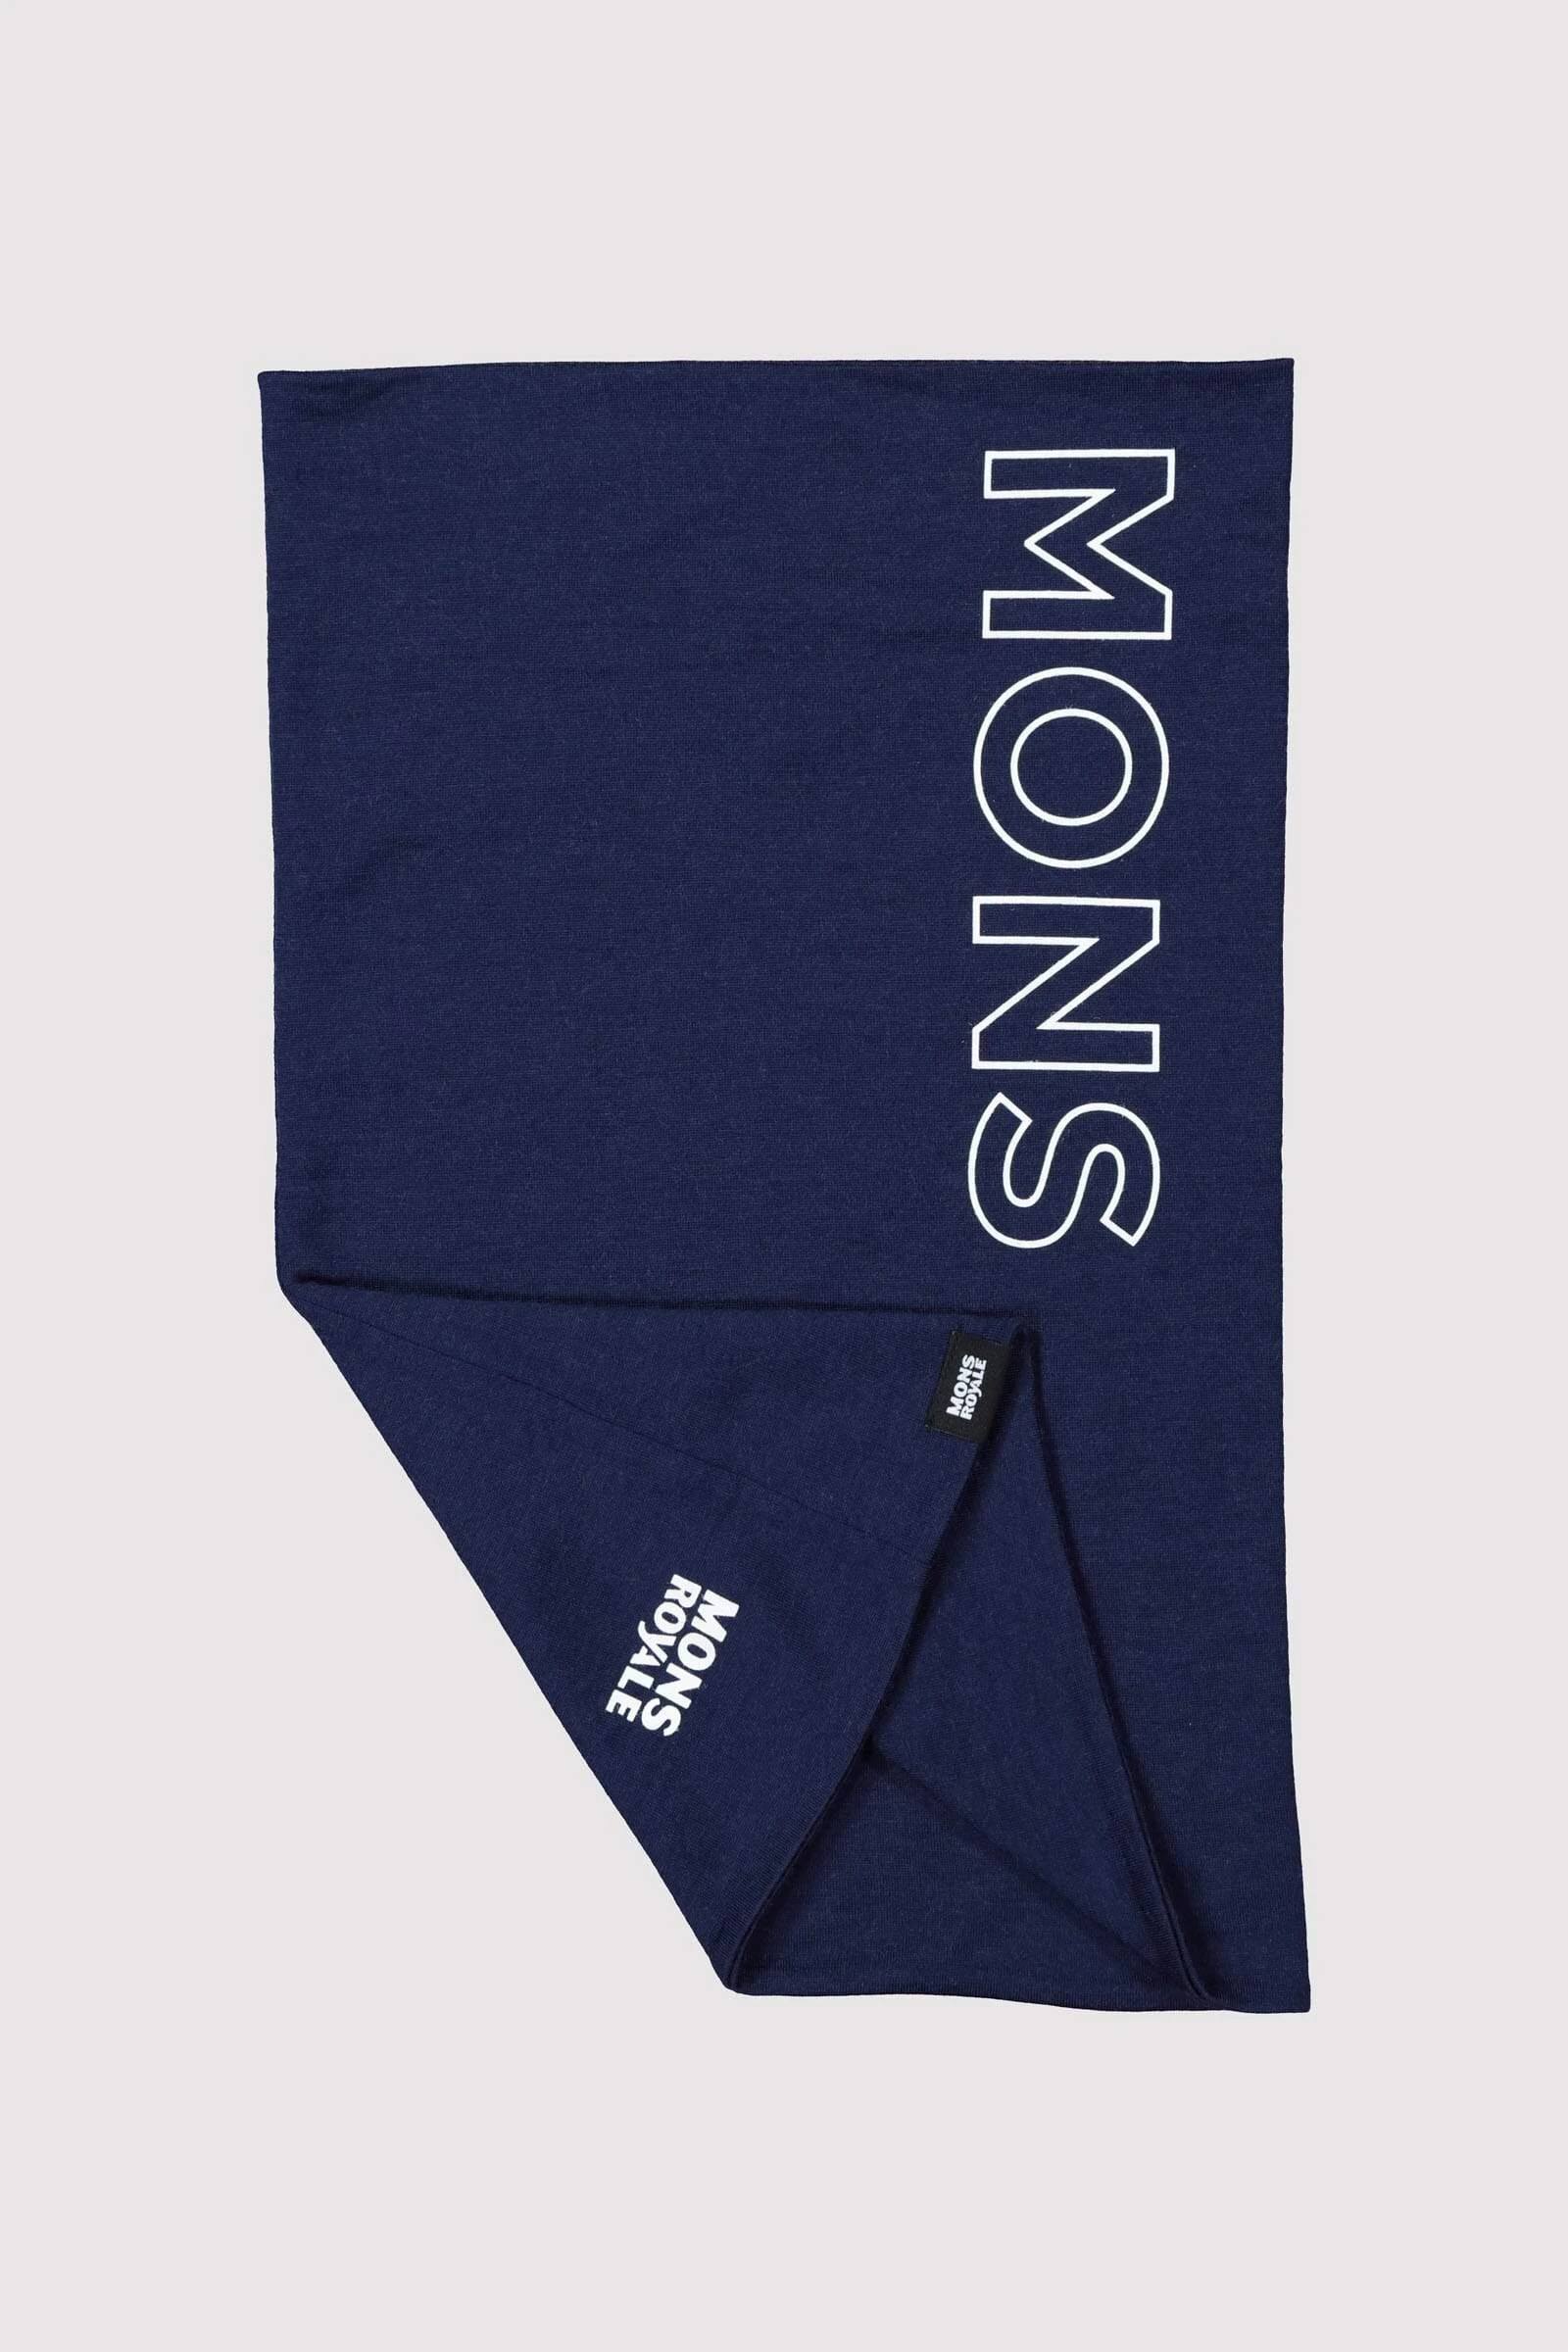 Mons Royale Double Up Neckwarmer Navy